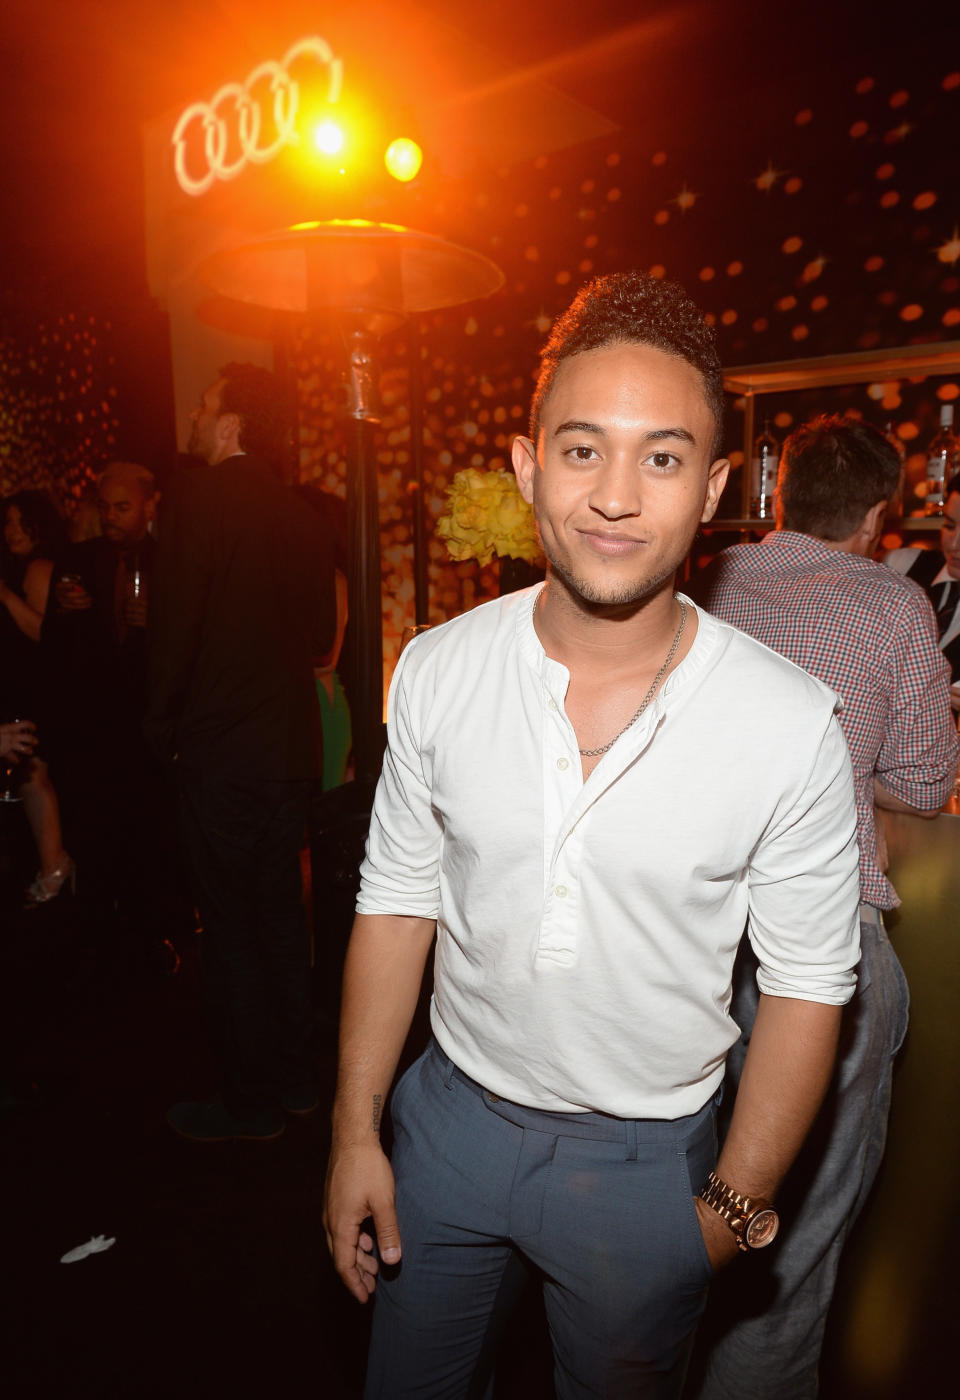 Mowry is best known for his role as smart alec T.J. Henderson on the WB's "Smart Guy," but the actor gained Disney fame on the animated series "Kim Possible" as the voice of Wade. Since his childhood, Mowry has played high school and college football, graduated from Pepperdine University, and now stars in ABC Family's "Baby Daddy." How'd he survive young stardom? "Whenever I wasn’t working, I had my butt <a href="http://www.ebony.com/entertainment-culture/tahj-mowry-from-child-star-to-adult-actor-888#axzz2pMZTDsRj">back in normal school</a>. I went from the [TV] set to football practice, from the set to track practice. My parents separated it and that let me know that TV life wasn’t my normal life; that was my job and my hobby. [The key is] being around normal kids! [Laughs] Some child actors grow up crazy and it’s not their fault," he told Ebony magazine in 2012. Oh, and he's a pretty <a href="http://www.youtube.com/watch?v=B__qsSgmXpg">dreamy singer</a> … 